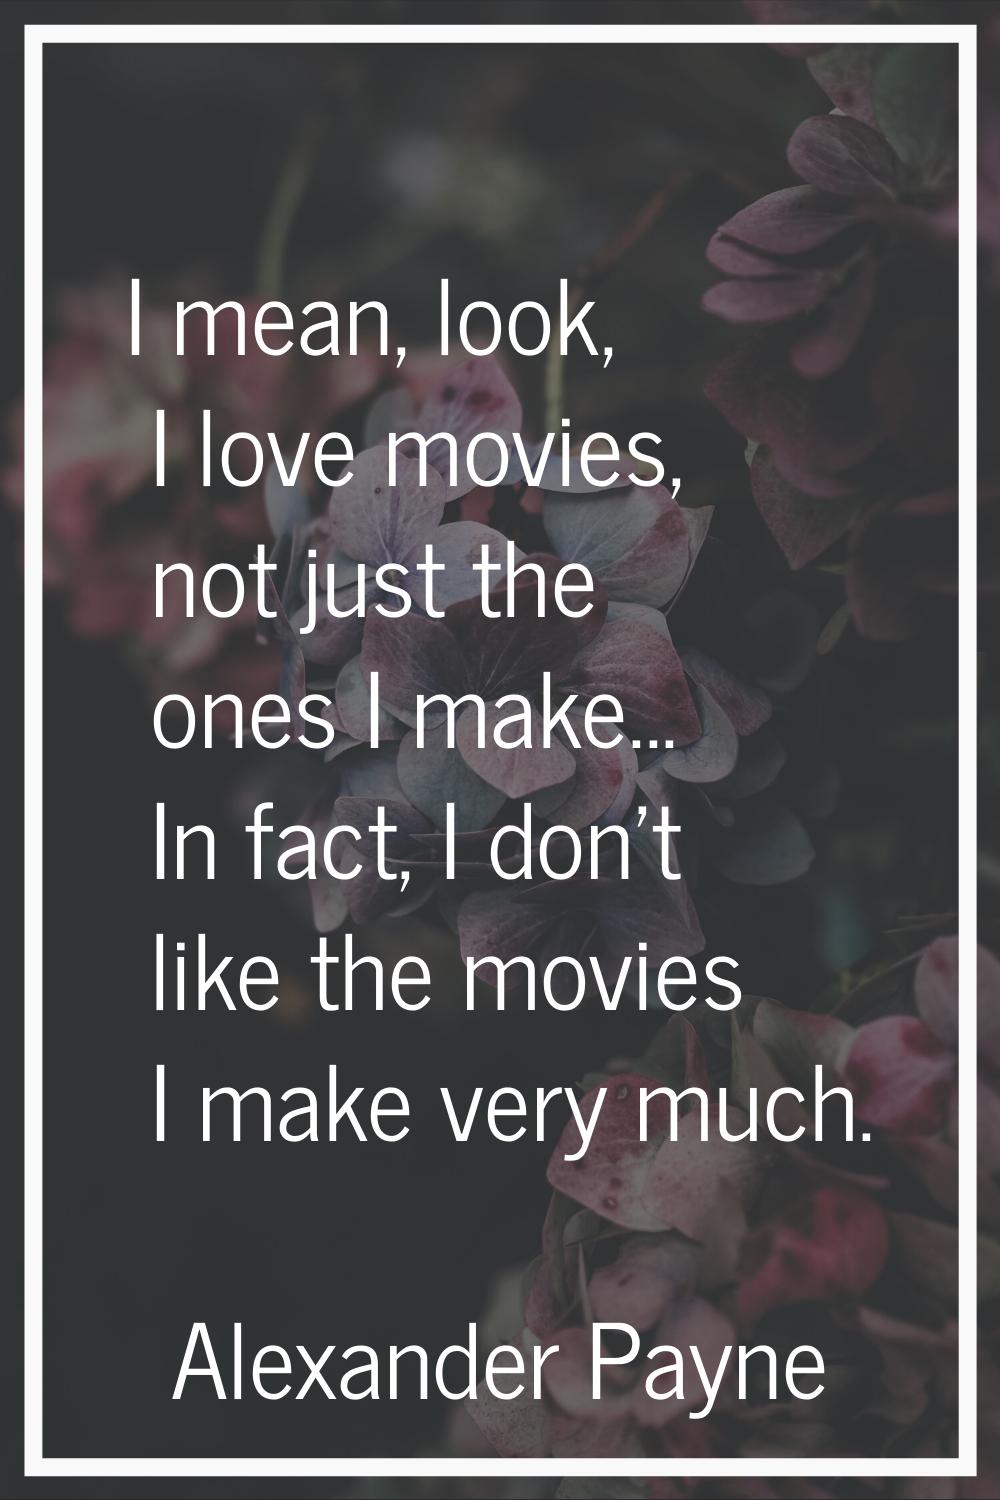 I mean, look, I love movies, not just the ones I make... In fact, I don't like the movies I make ve